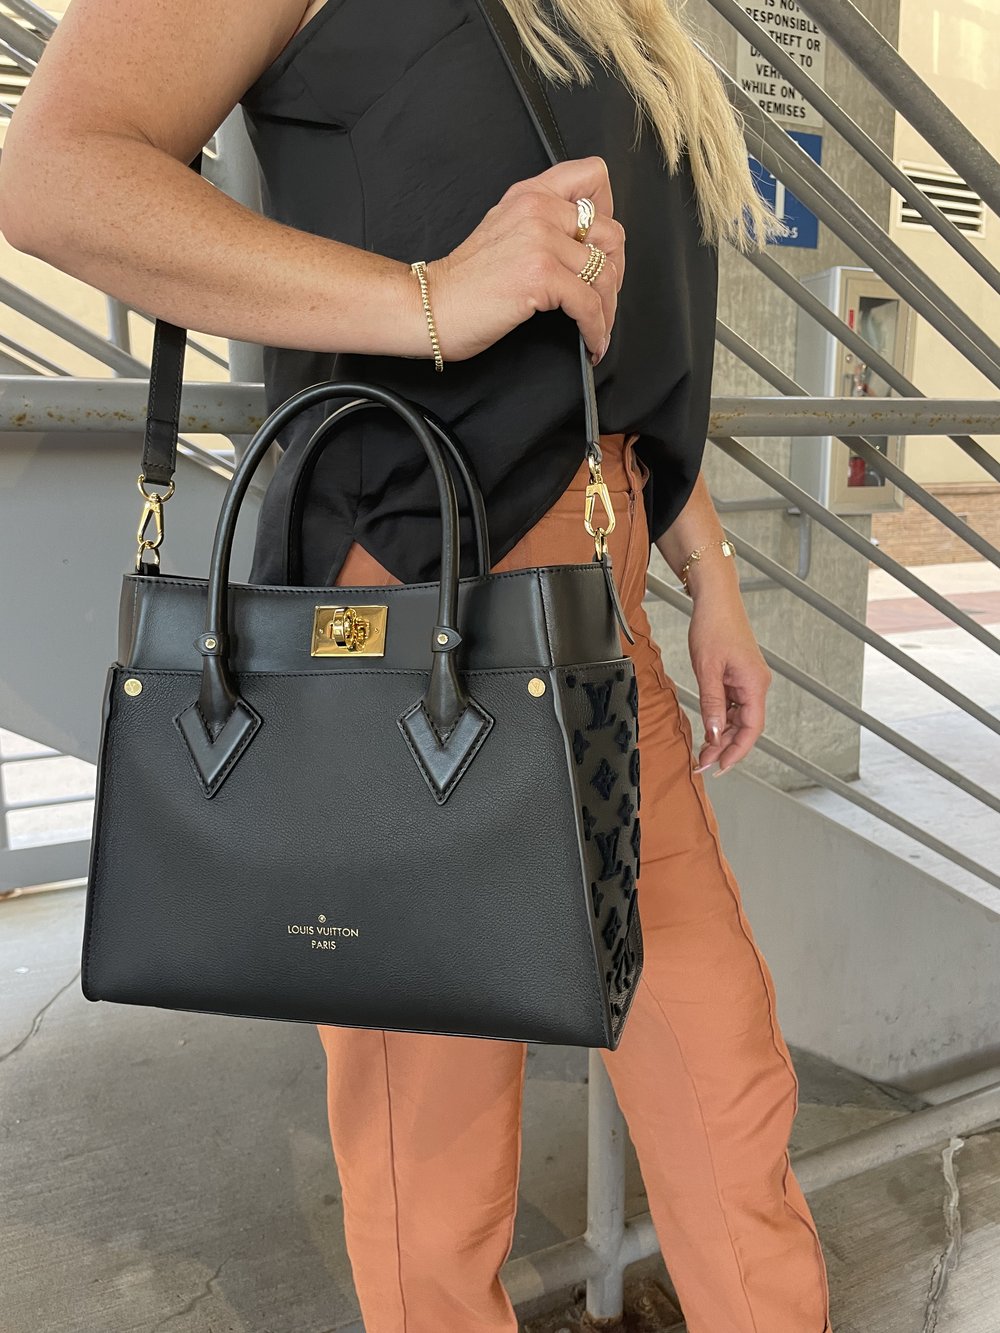 Louis Vuitton On My Side Review: The Everyday Bag House of Harvey